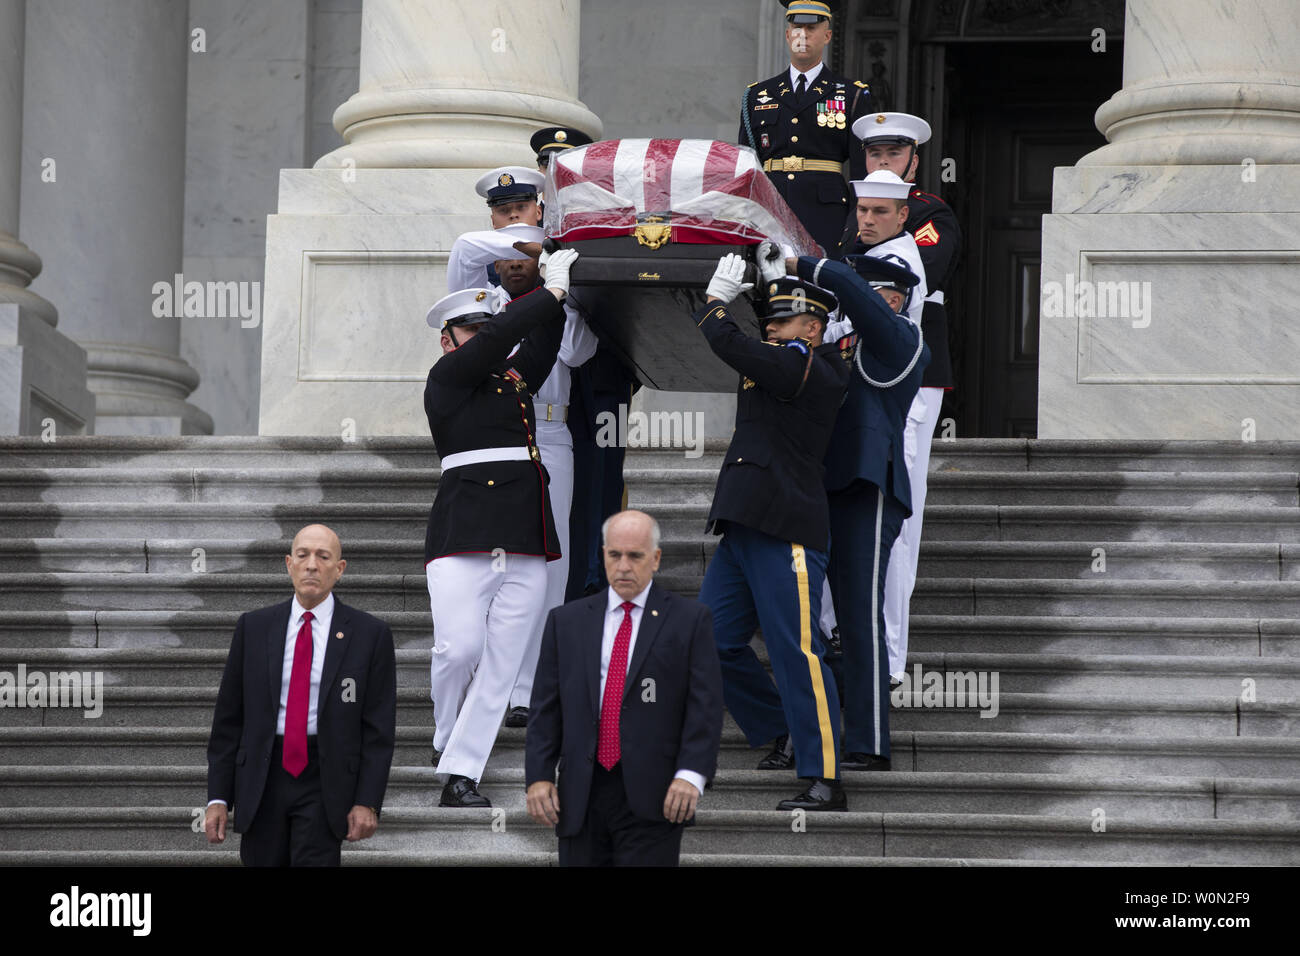 Joint service members of a military casket team carry the casket of Senator John McCain from the US Capitol to a motorcade that will ferry him to a funeral service at the National Cathedral in Washington, DC,  September 1, 2018. McCain died August 25, 2018 from brain cancer at his ranch in Sedona, Arizona, USA. He was a veteran of the Vietnam War, served two terms in the US House of Representatives, and was elected to five terms in the US Senate. McCain also ran for president twice, and was the Republican nominee in 2008.       Photo by Jim Lo Scalzo/UPI Stock Photo